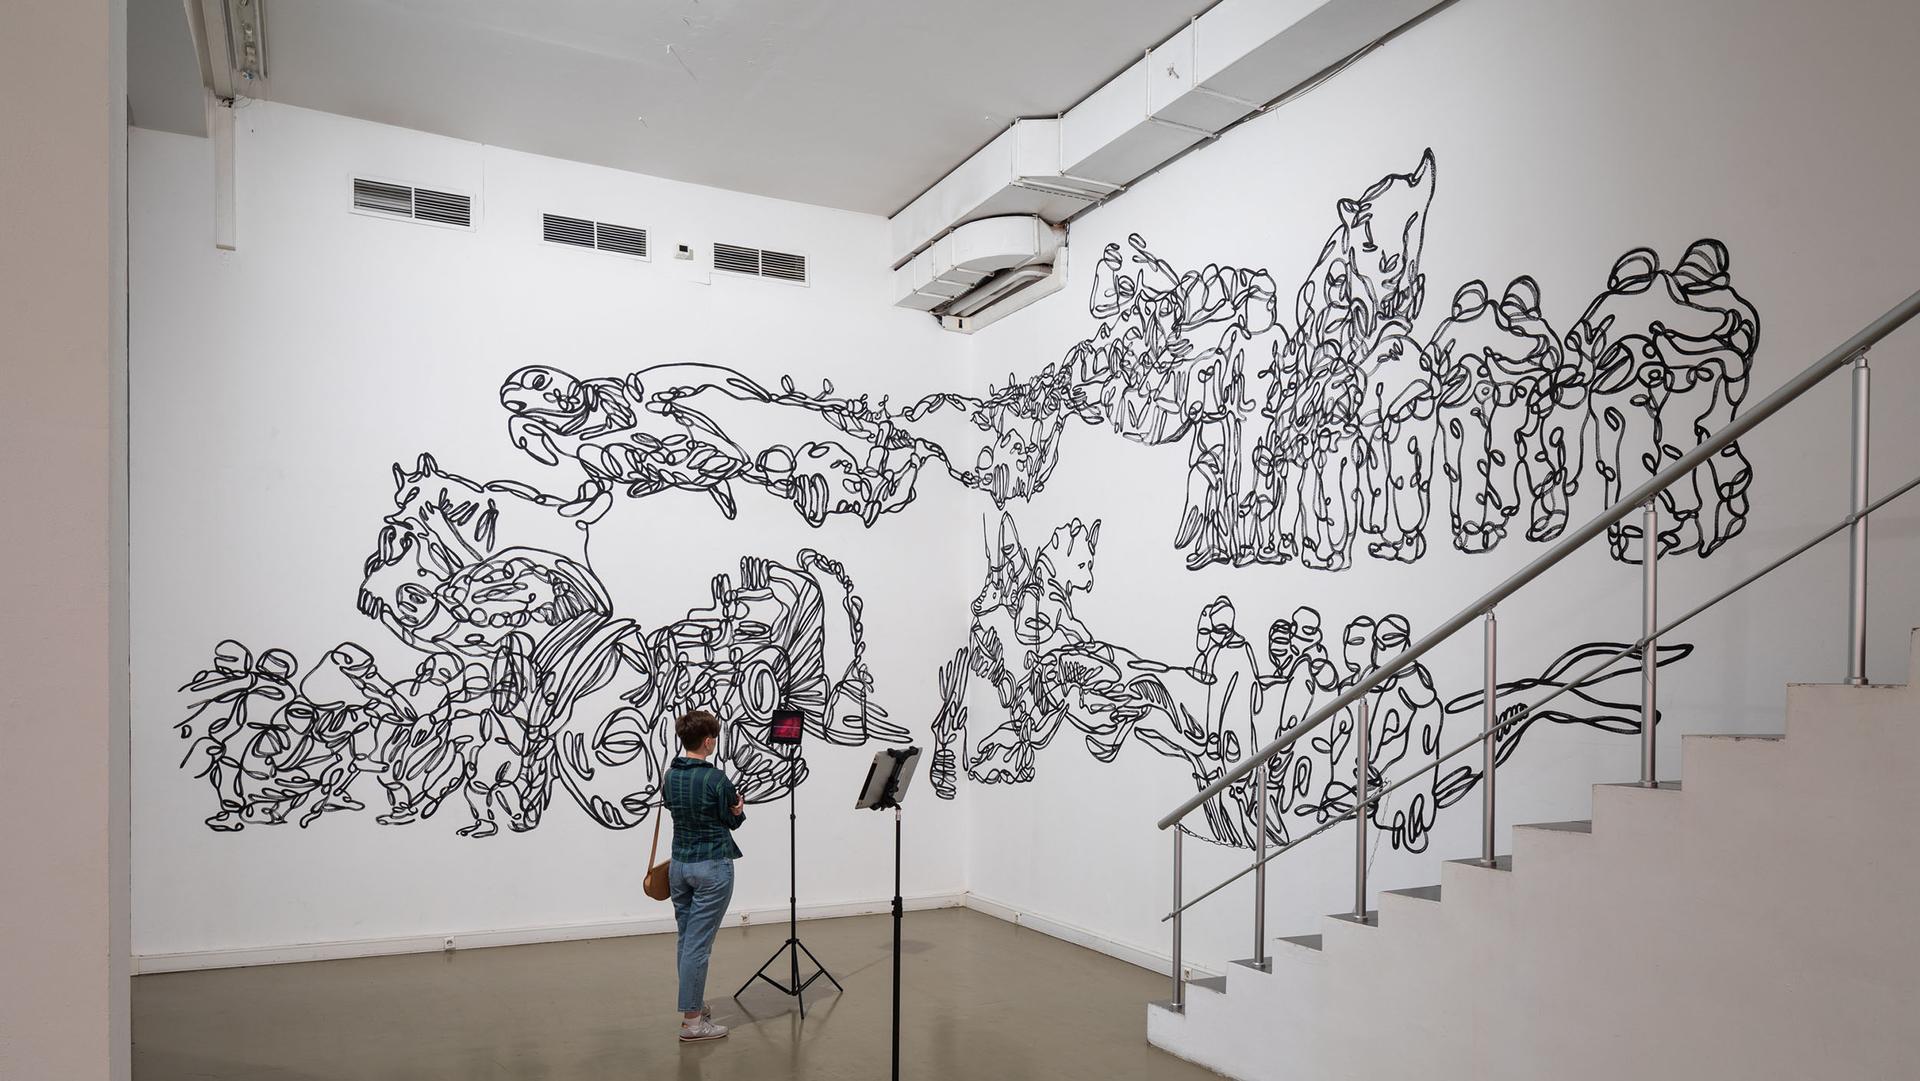 A white wall with black ink drawings and a person standing to view it